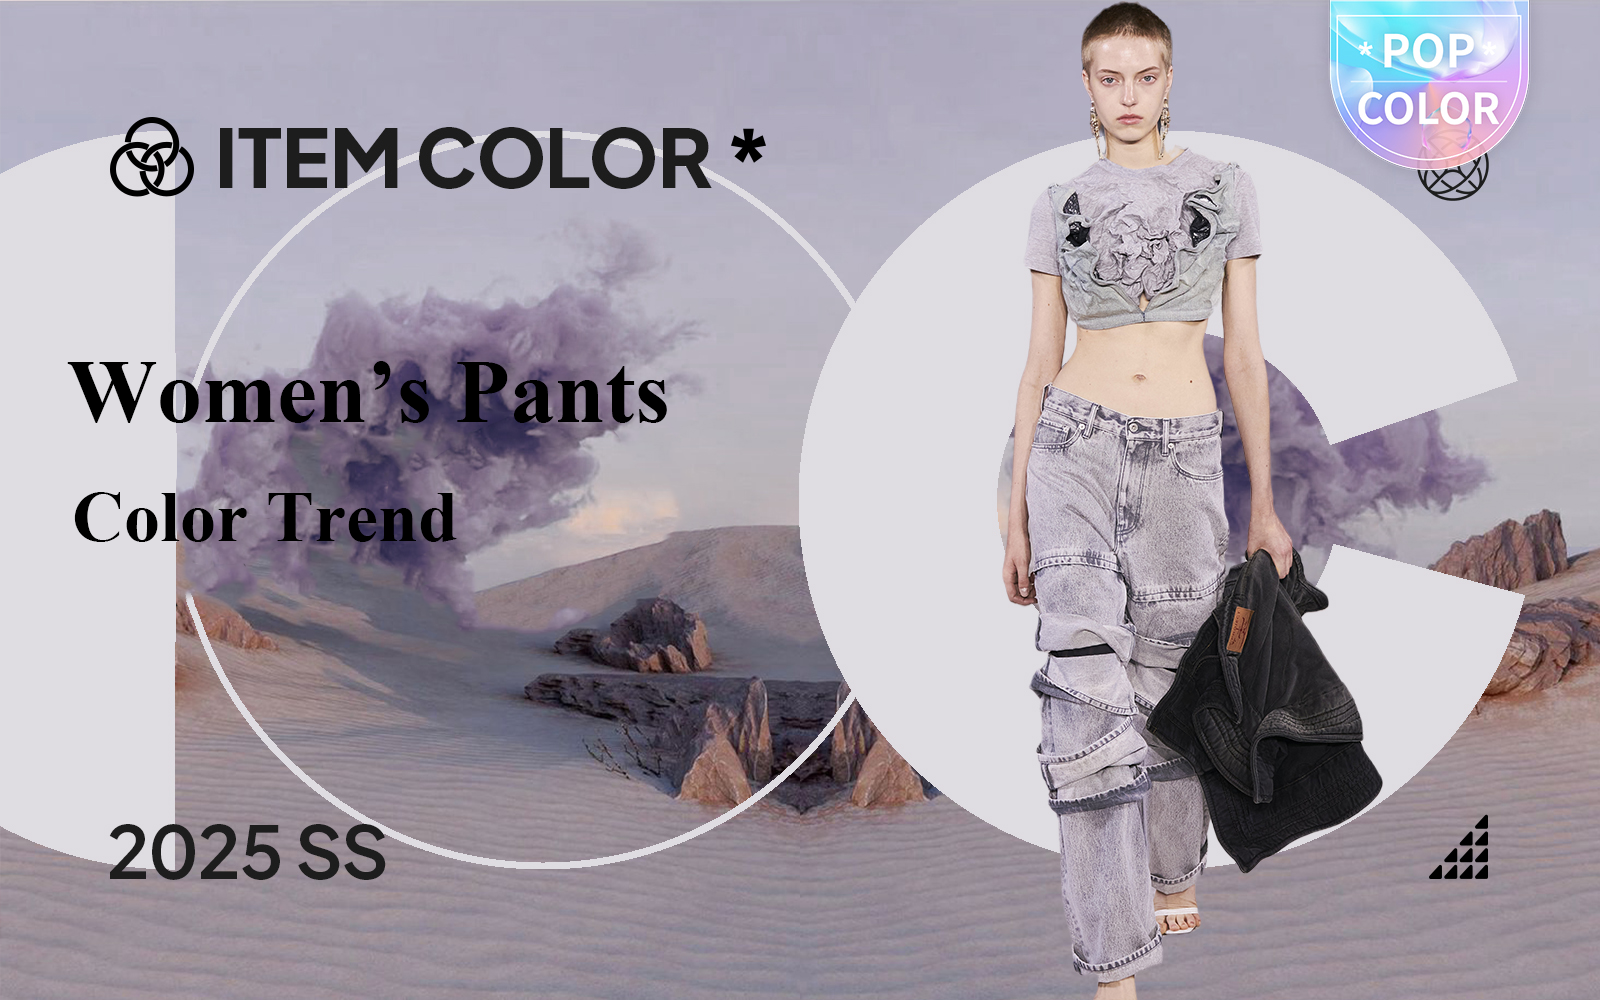 Practical Pales - The Color Trend for Women's Pants